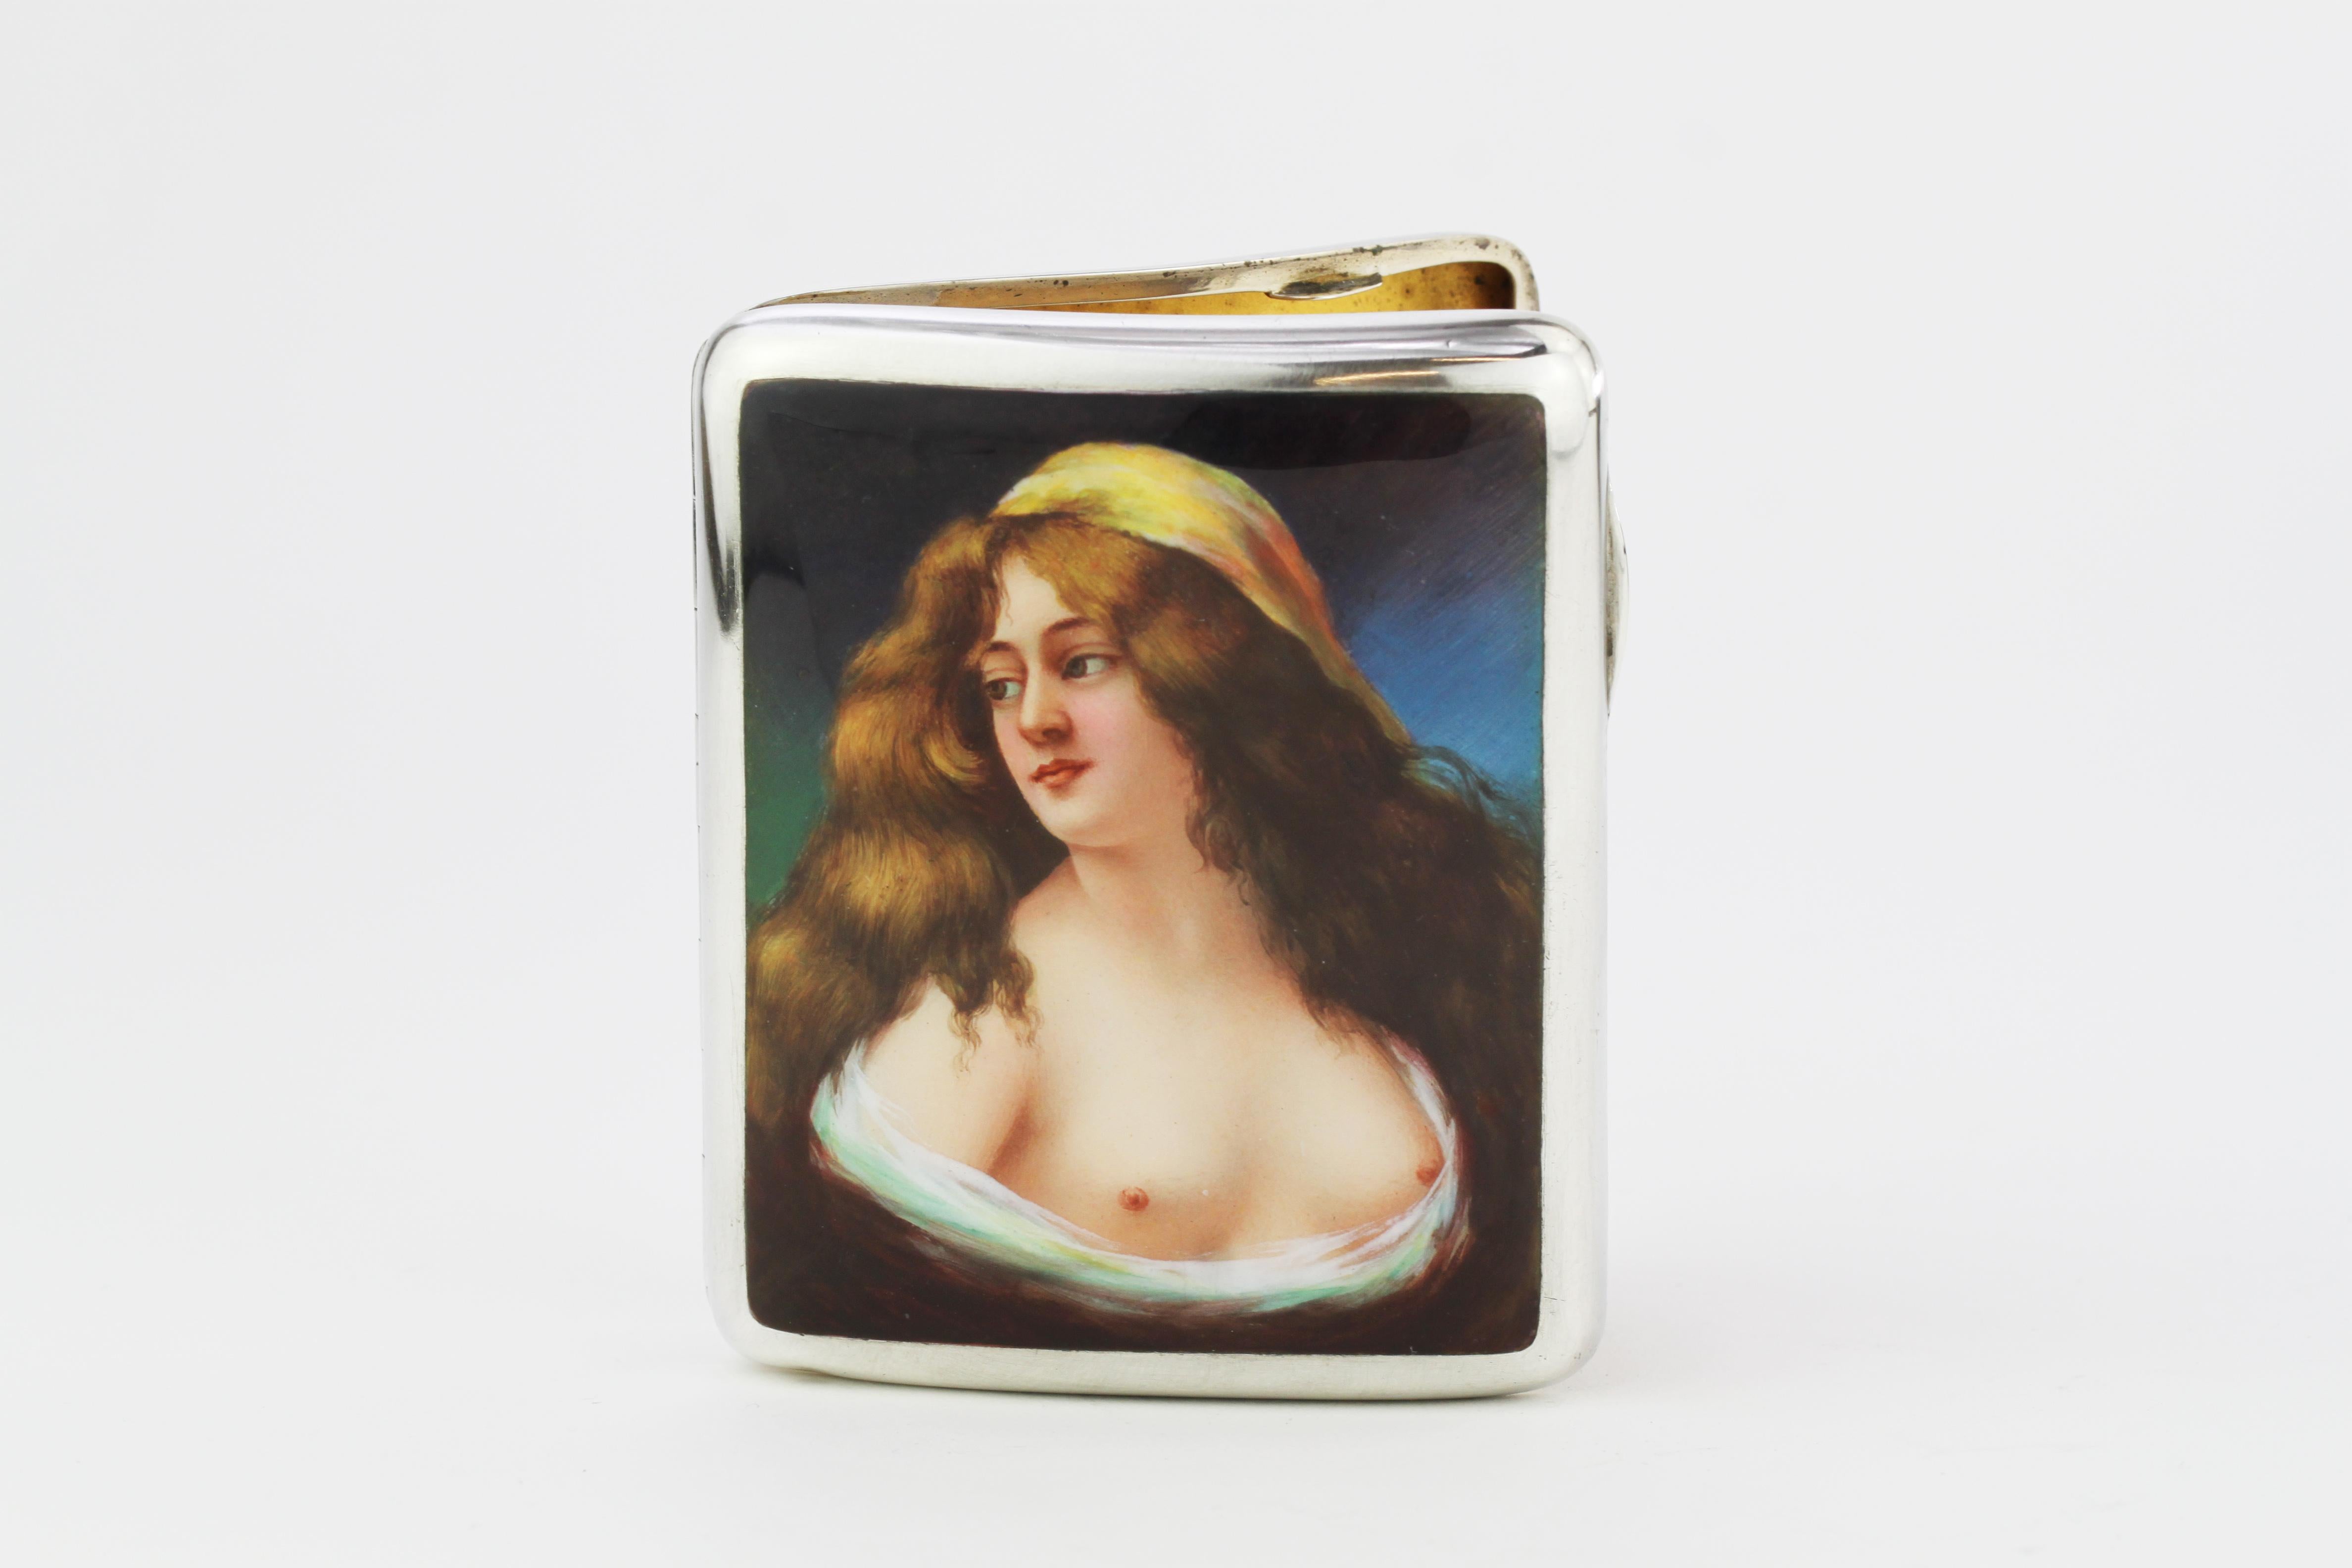 This exceptional antique Austrian sterling silver vesta case has a plain rectangular form with rounded corners.

The interior surface of the silver and enamel vesta case is ornamented with an impressive enamel panel depicting a semi-naked female